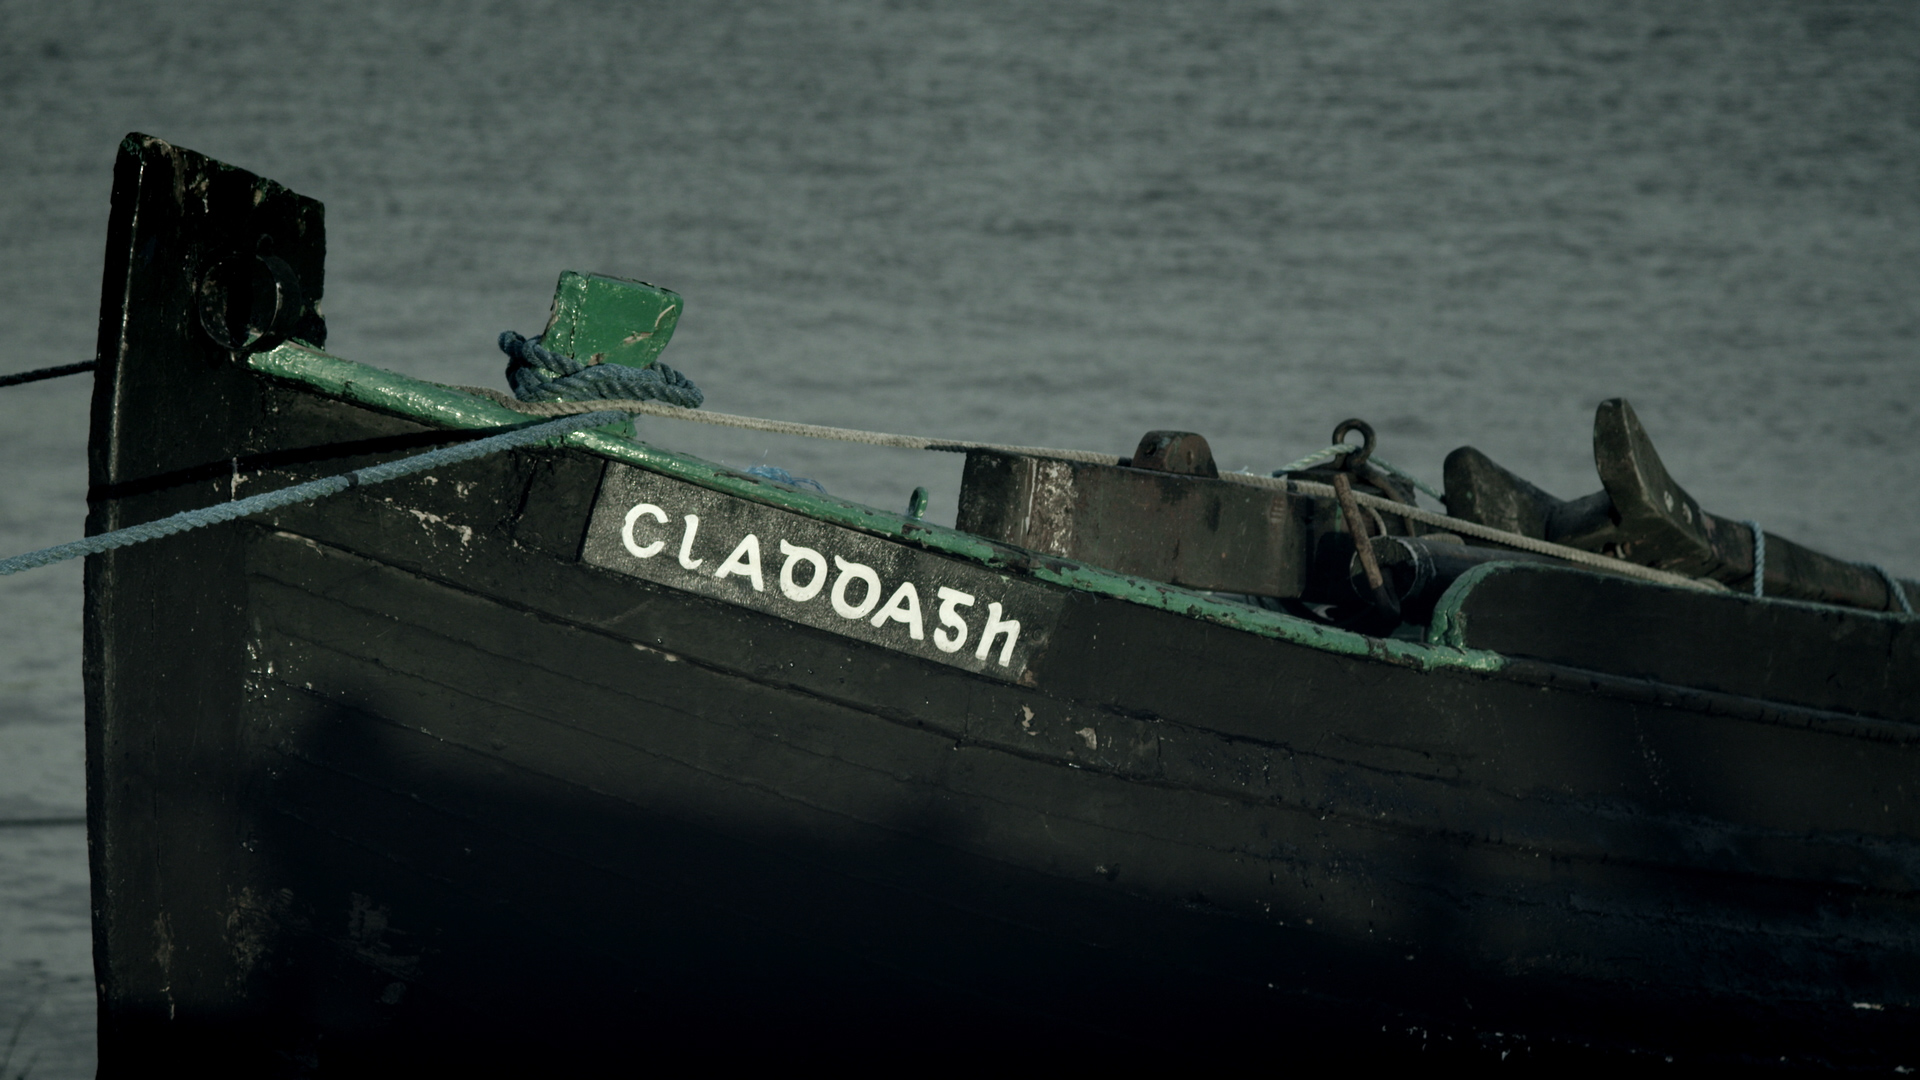 New bilingual documentary Cumar - a Galway Rhapsody debuts its trailer ahead of its world premiere at the 31st Galway Film Fleadh